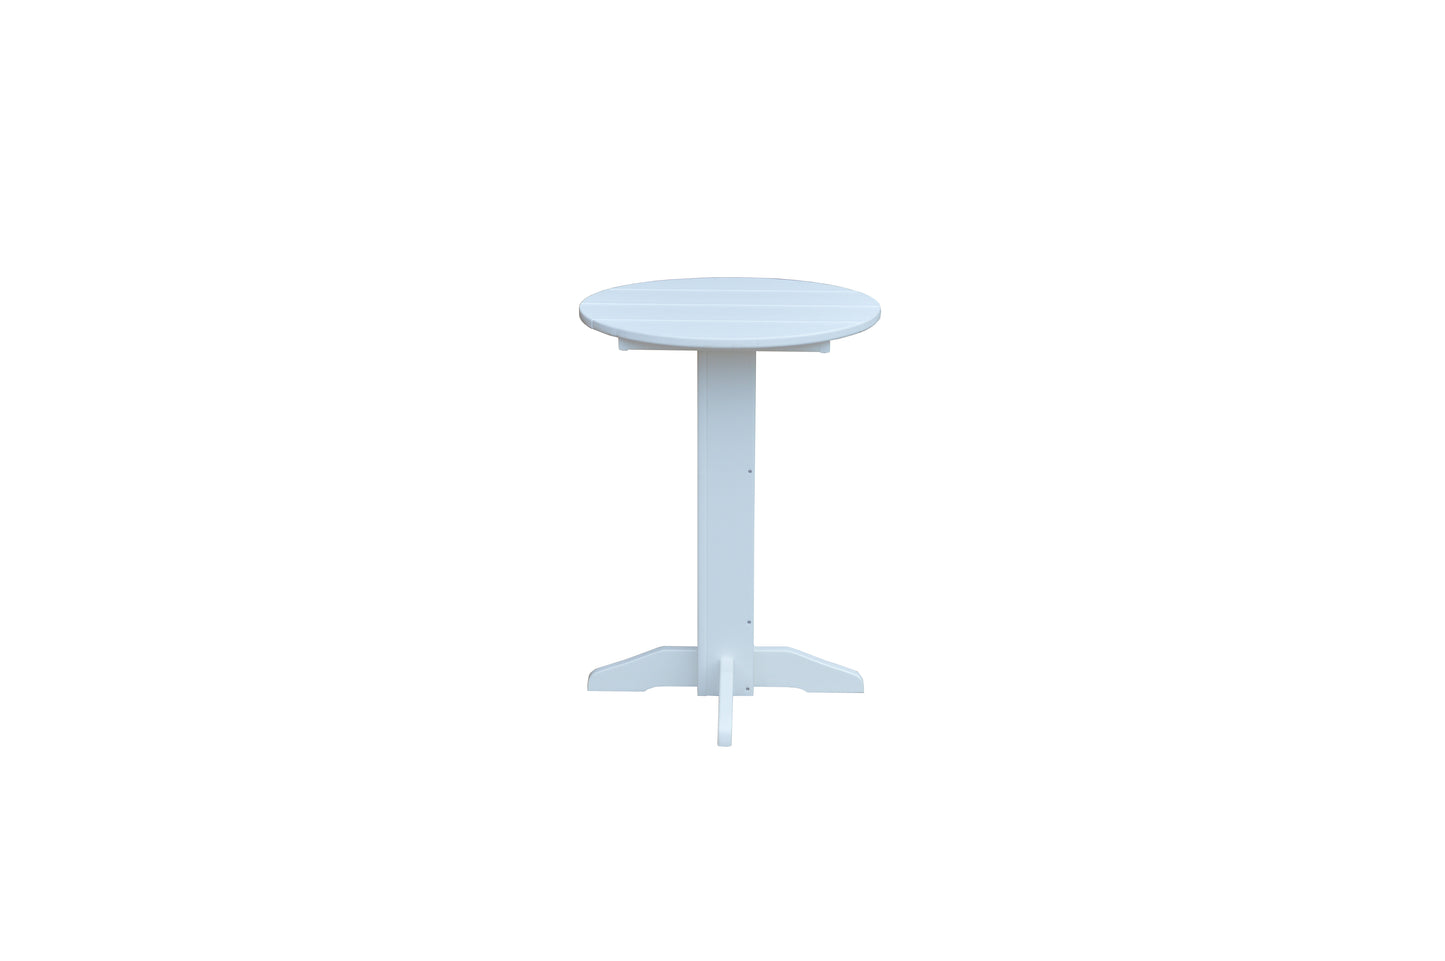 A&L Furniture Co. Recycled Plastic Round Bistro Table - LEAD TIME TO SHIP 10 BUSINESS DAYS